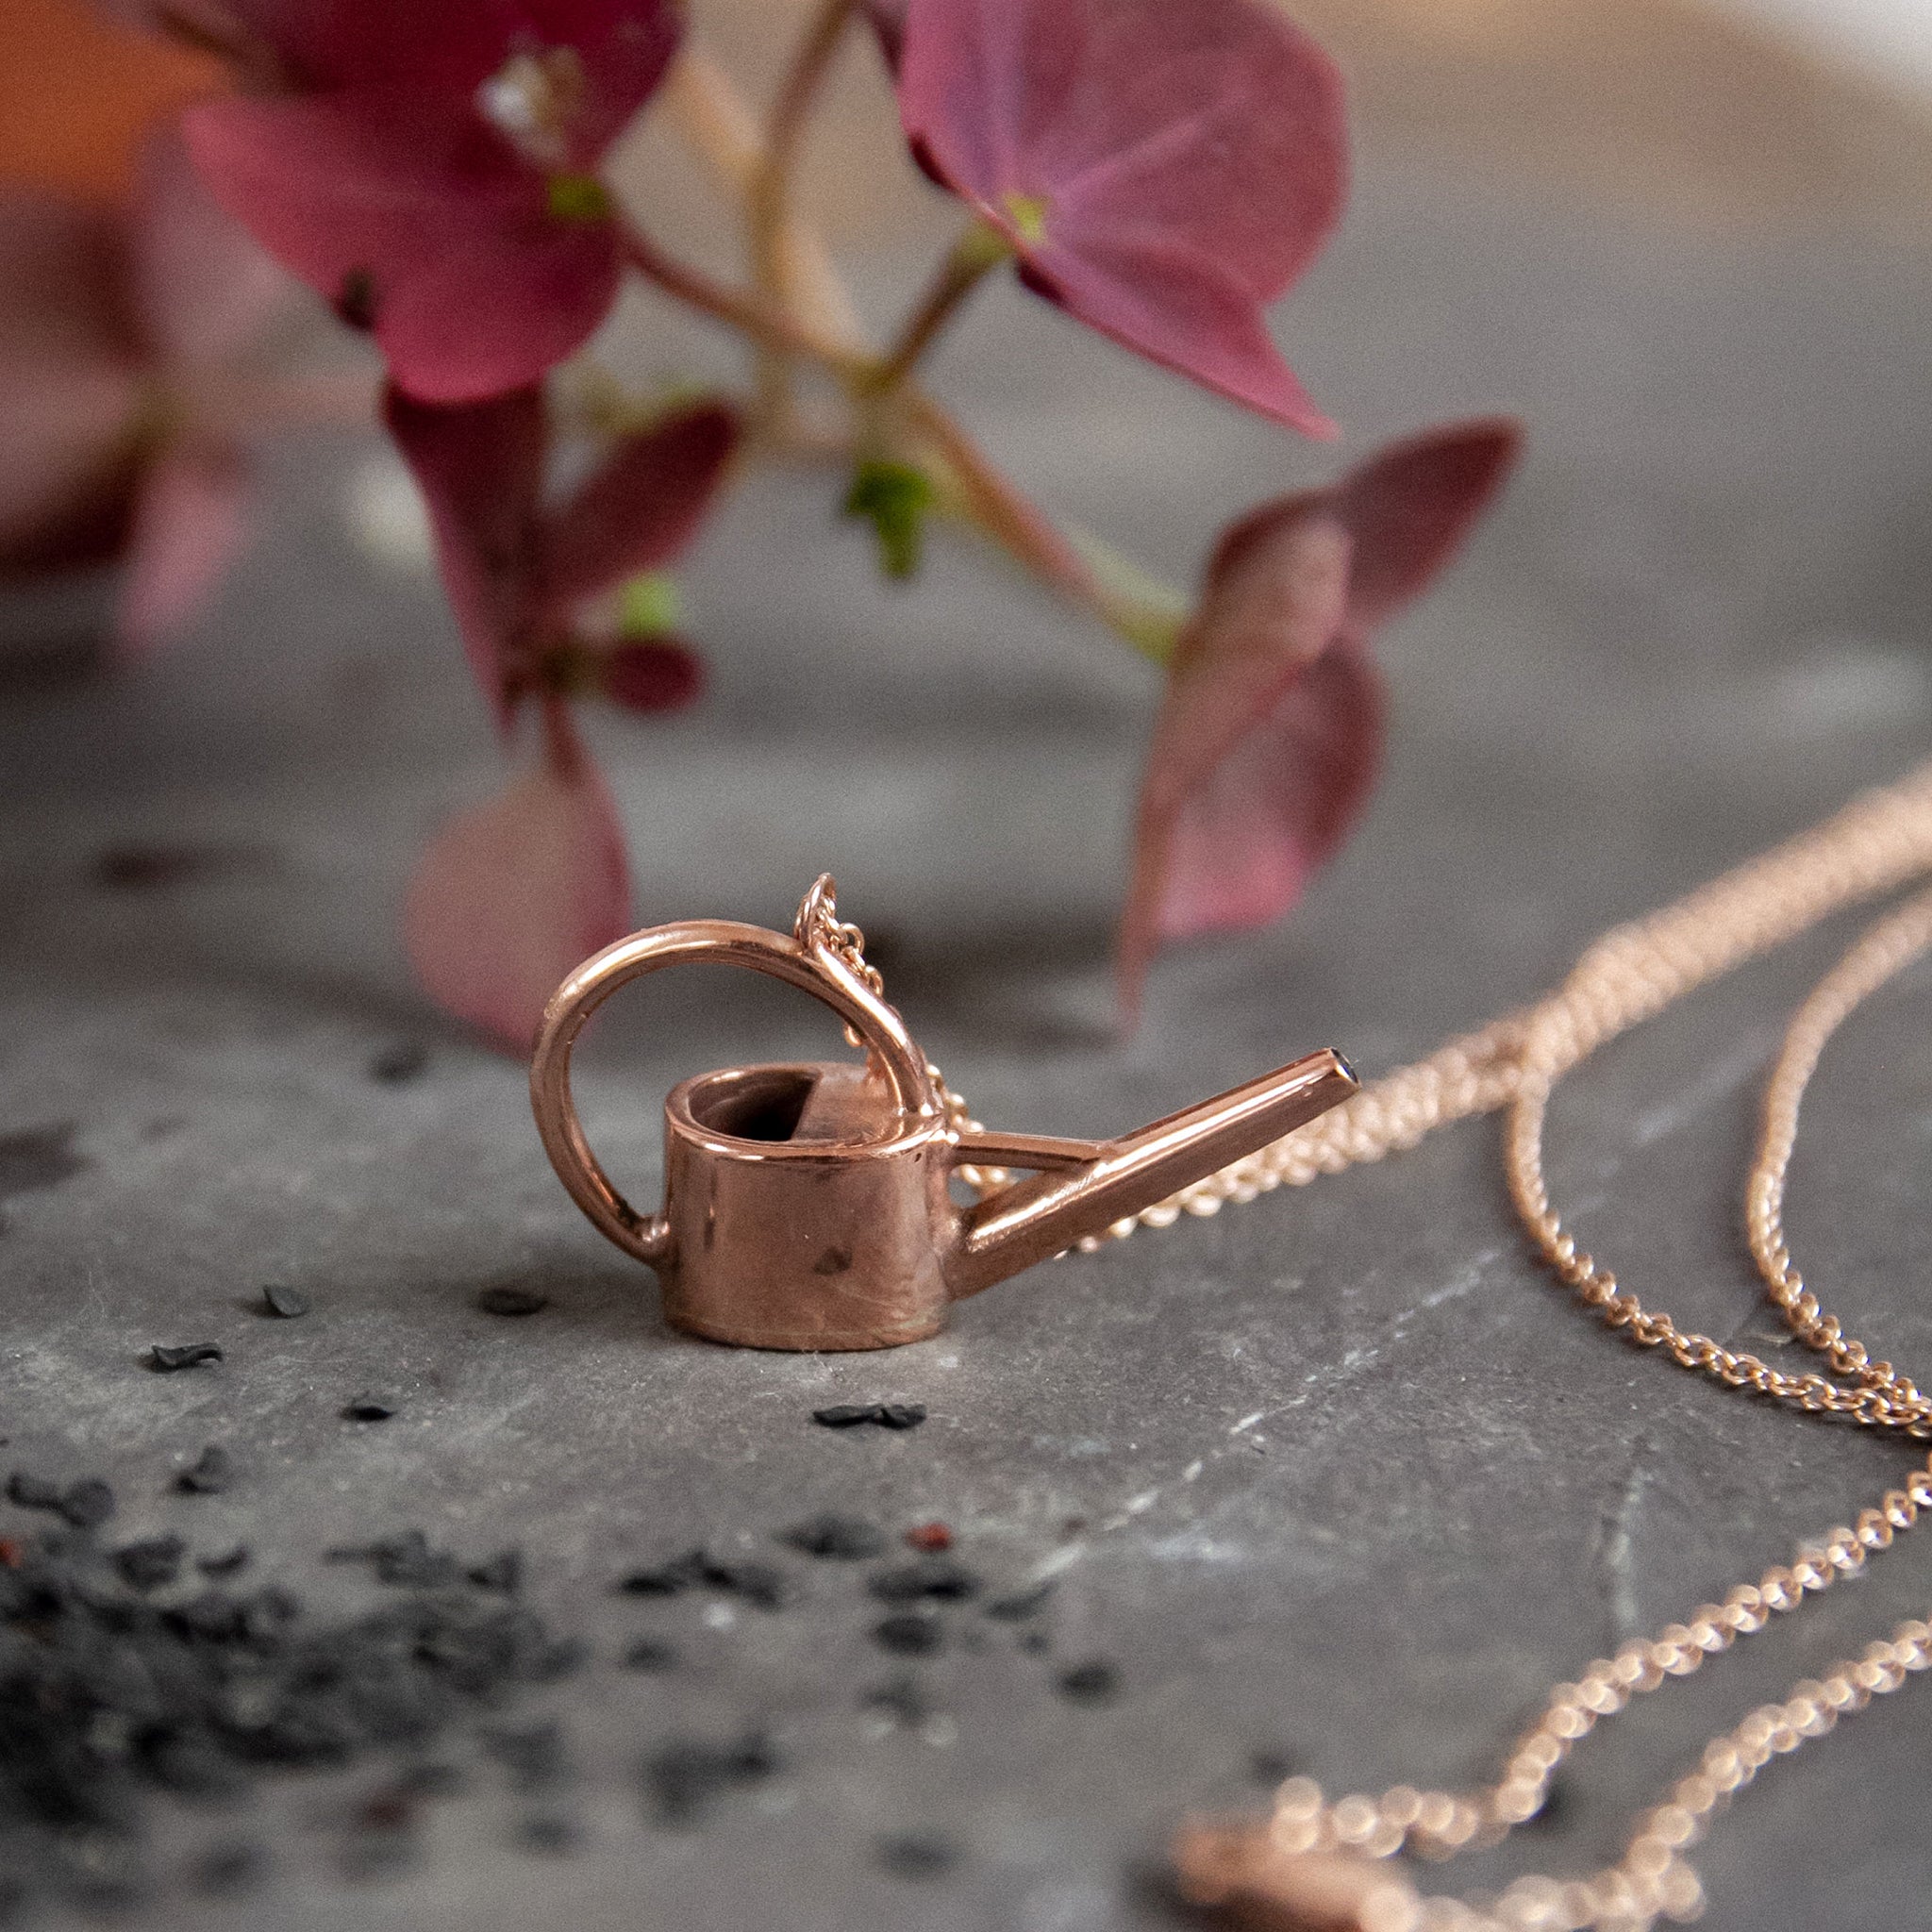 Ellen Lou Gardening Jewellery 9ct Rose Gold Watering Can Necklace